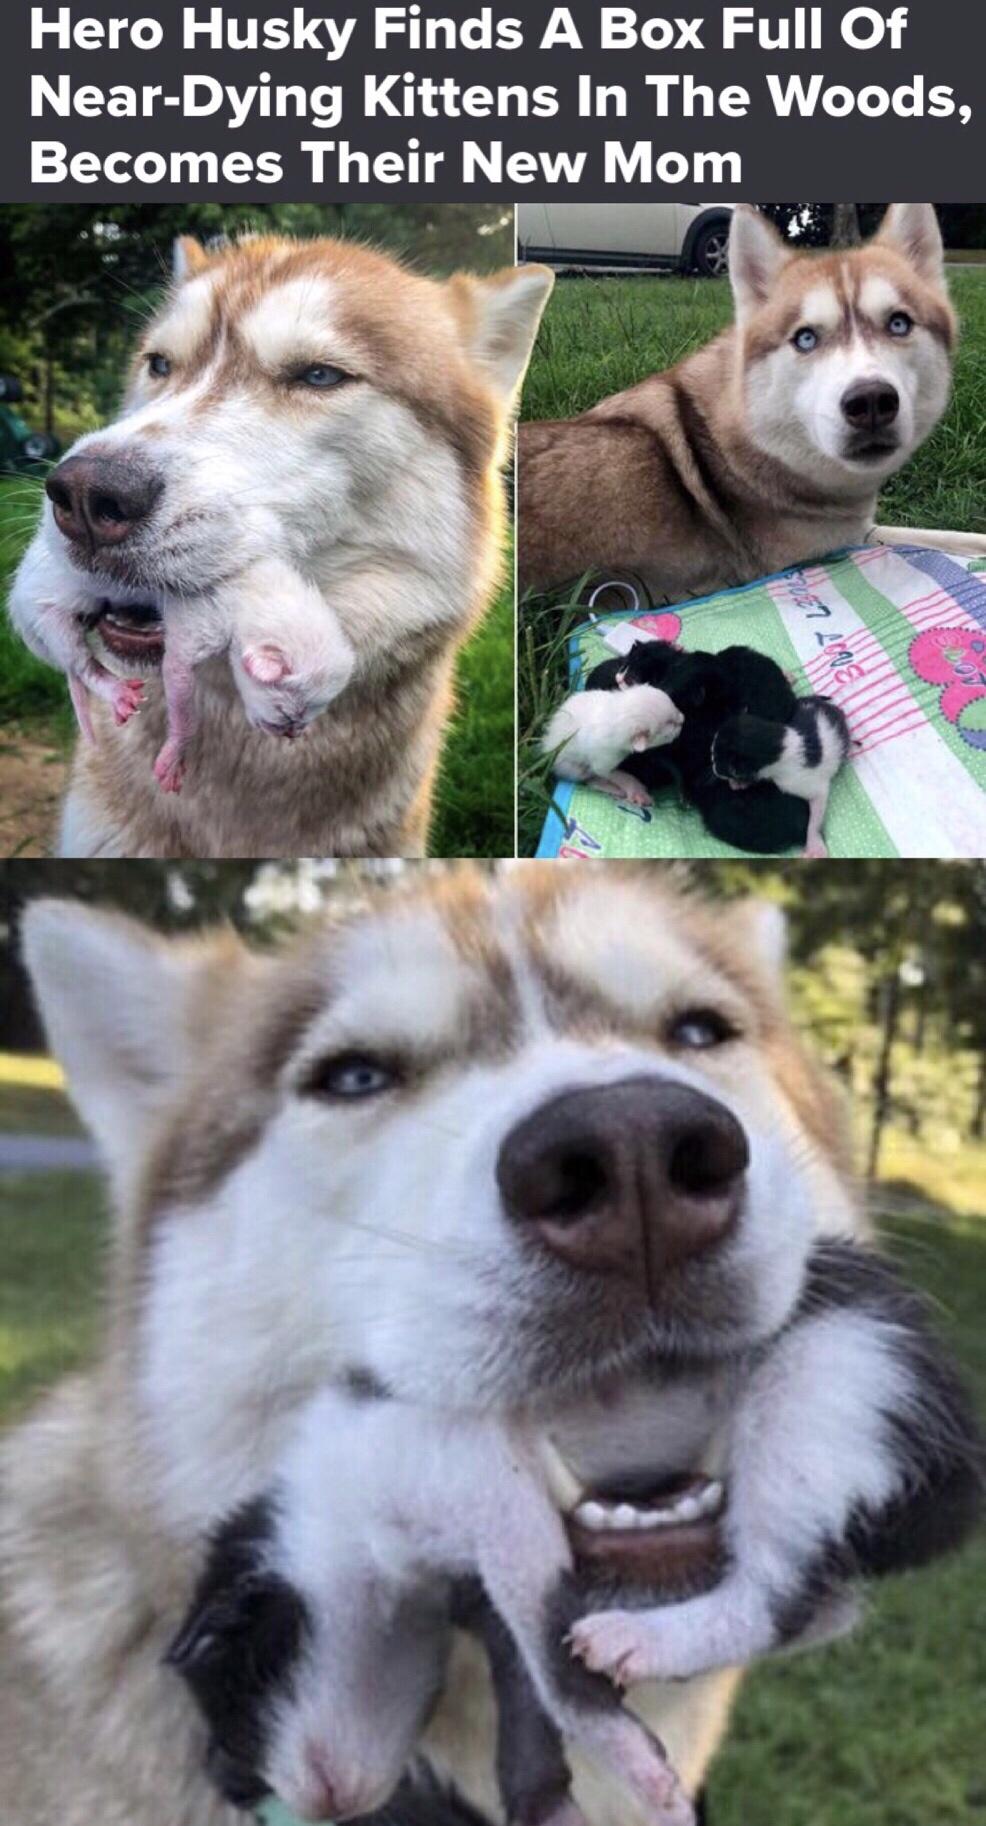 funny pics - Hero Husky Finds A Box Full Of NearDying Kittens In The Woods, Becomes Their New Mom